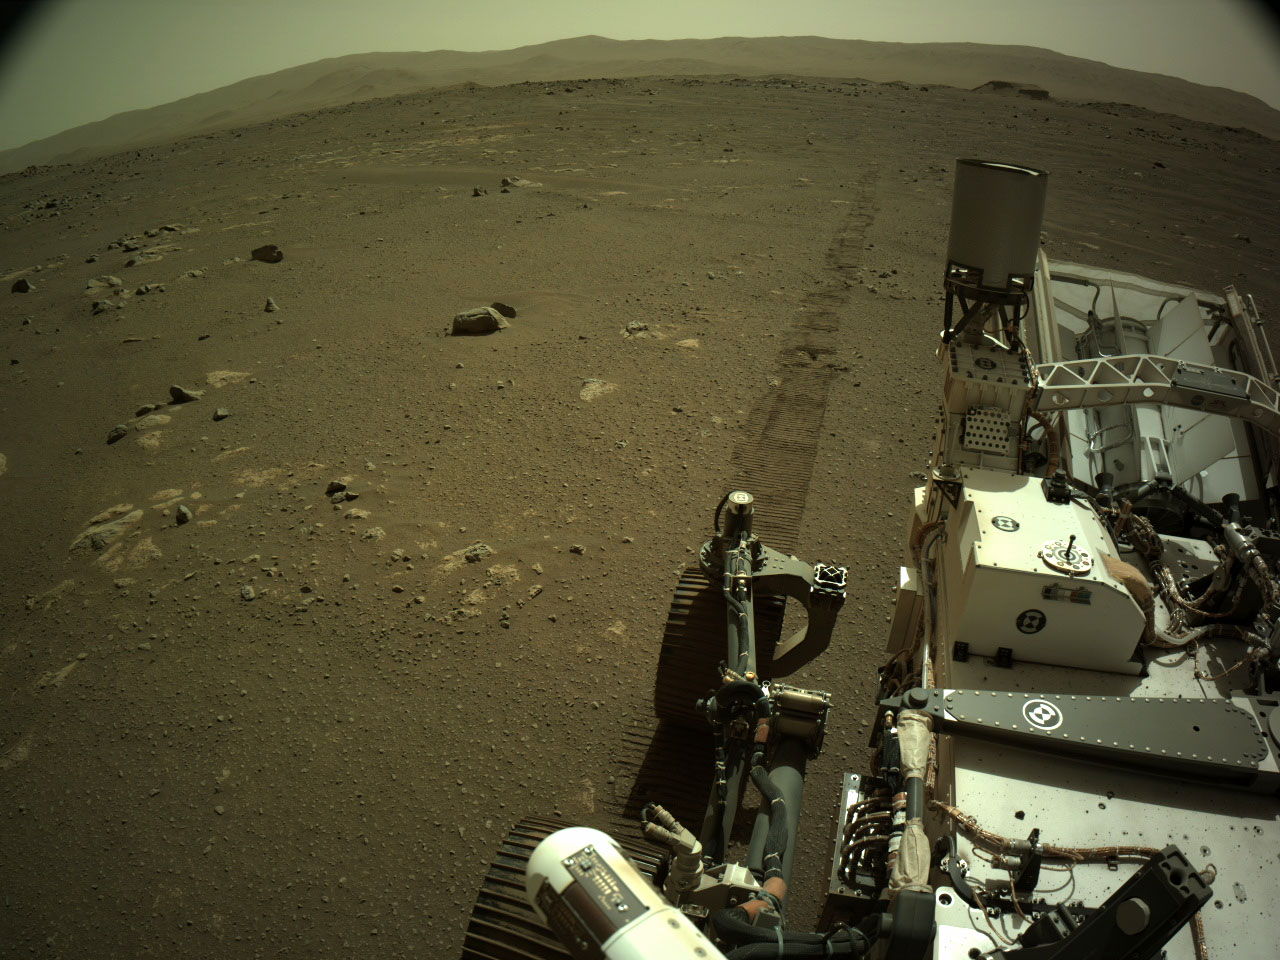 NASA’s Mars Perseverance rover acquired this image using its onboard Left Navigation Camera 